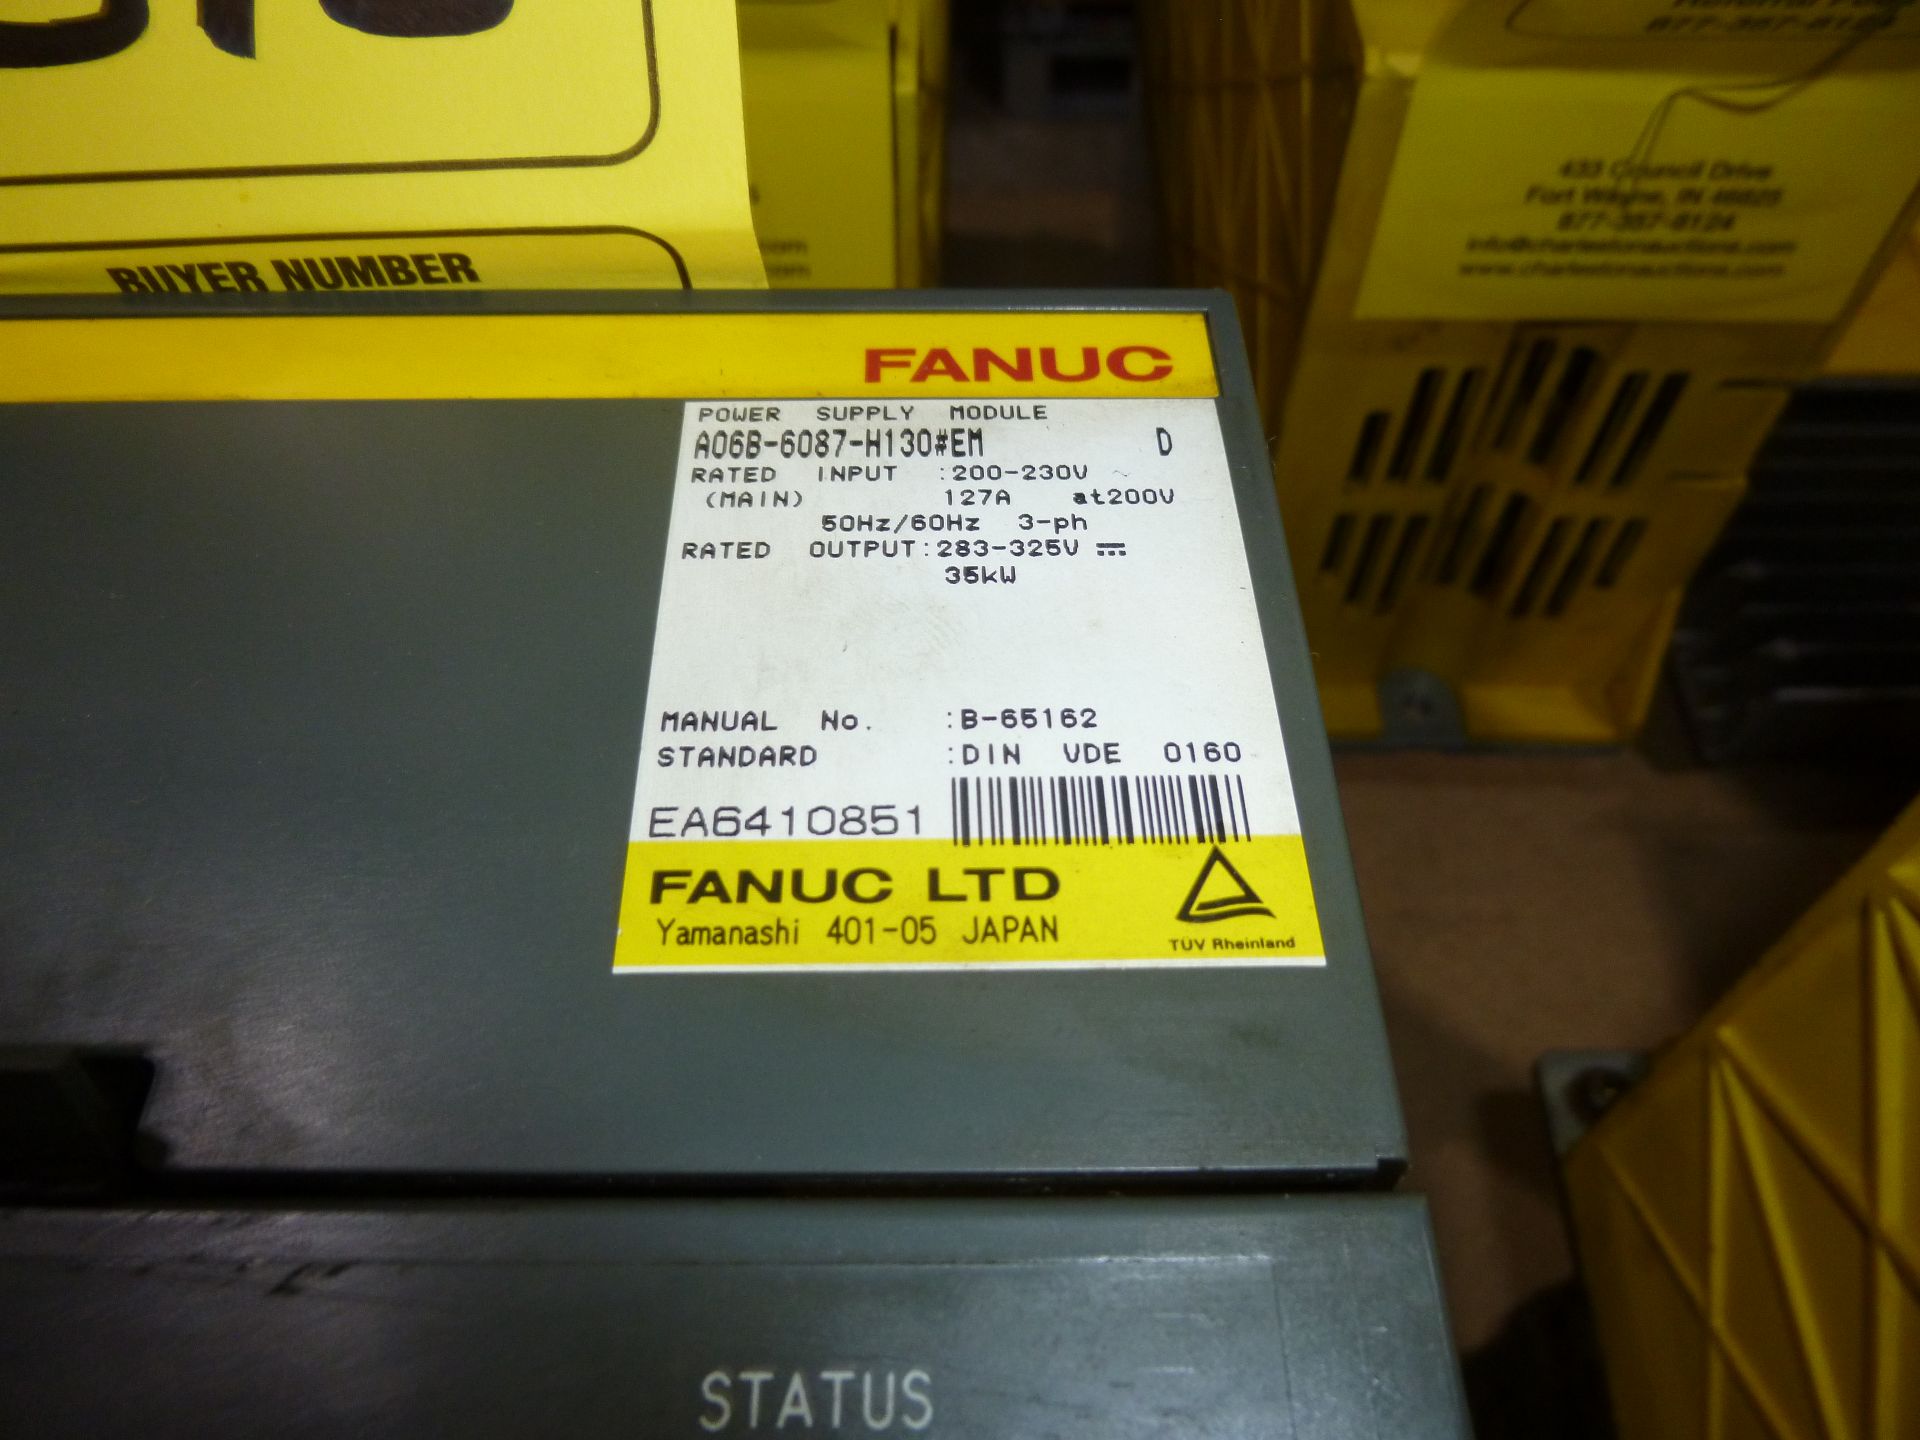 Fanuc power supply module model A06B-6087-H130 #EM, as always with Brolyn LLC auctions, all lots can - Image 2 of 2